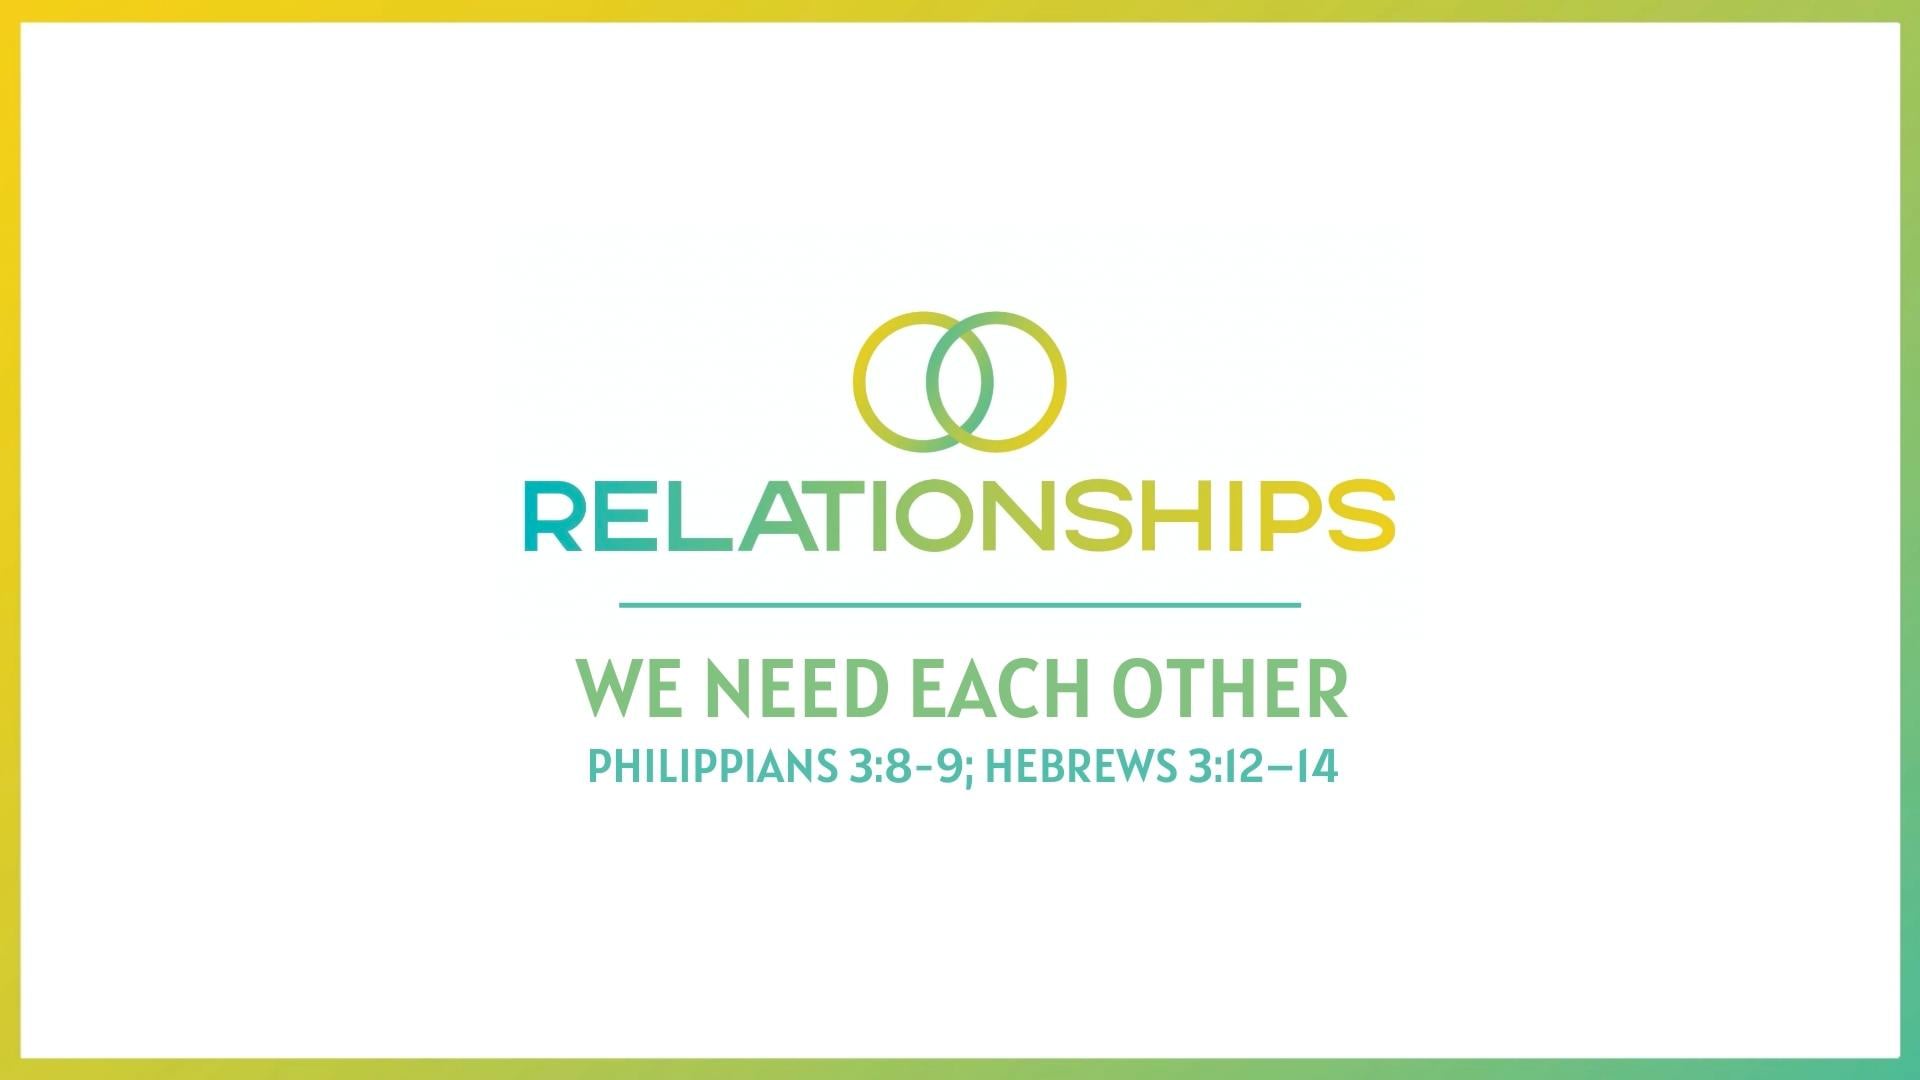 We Need Each Other - May 1, 2022